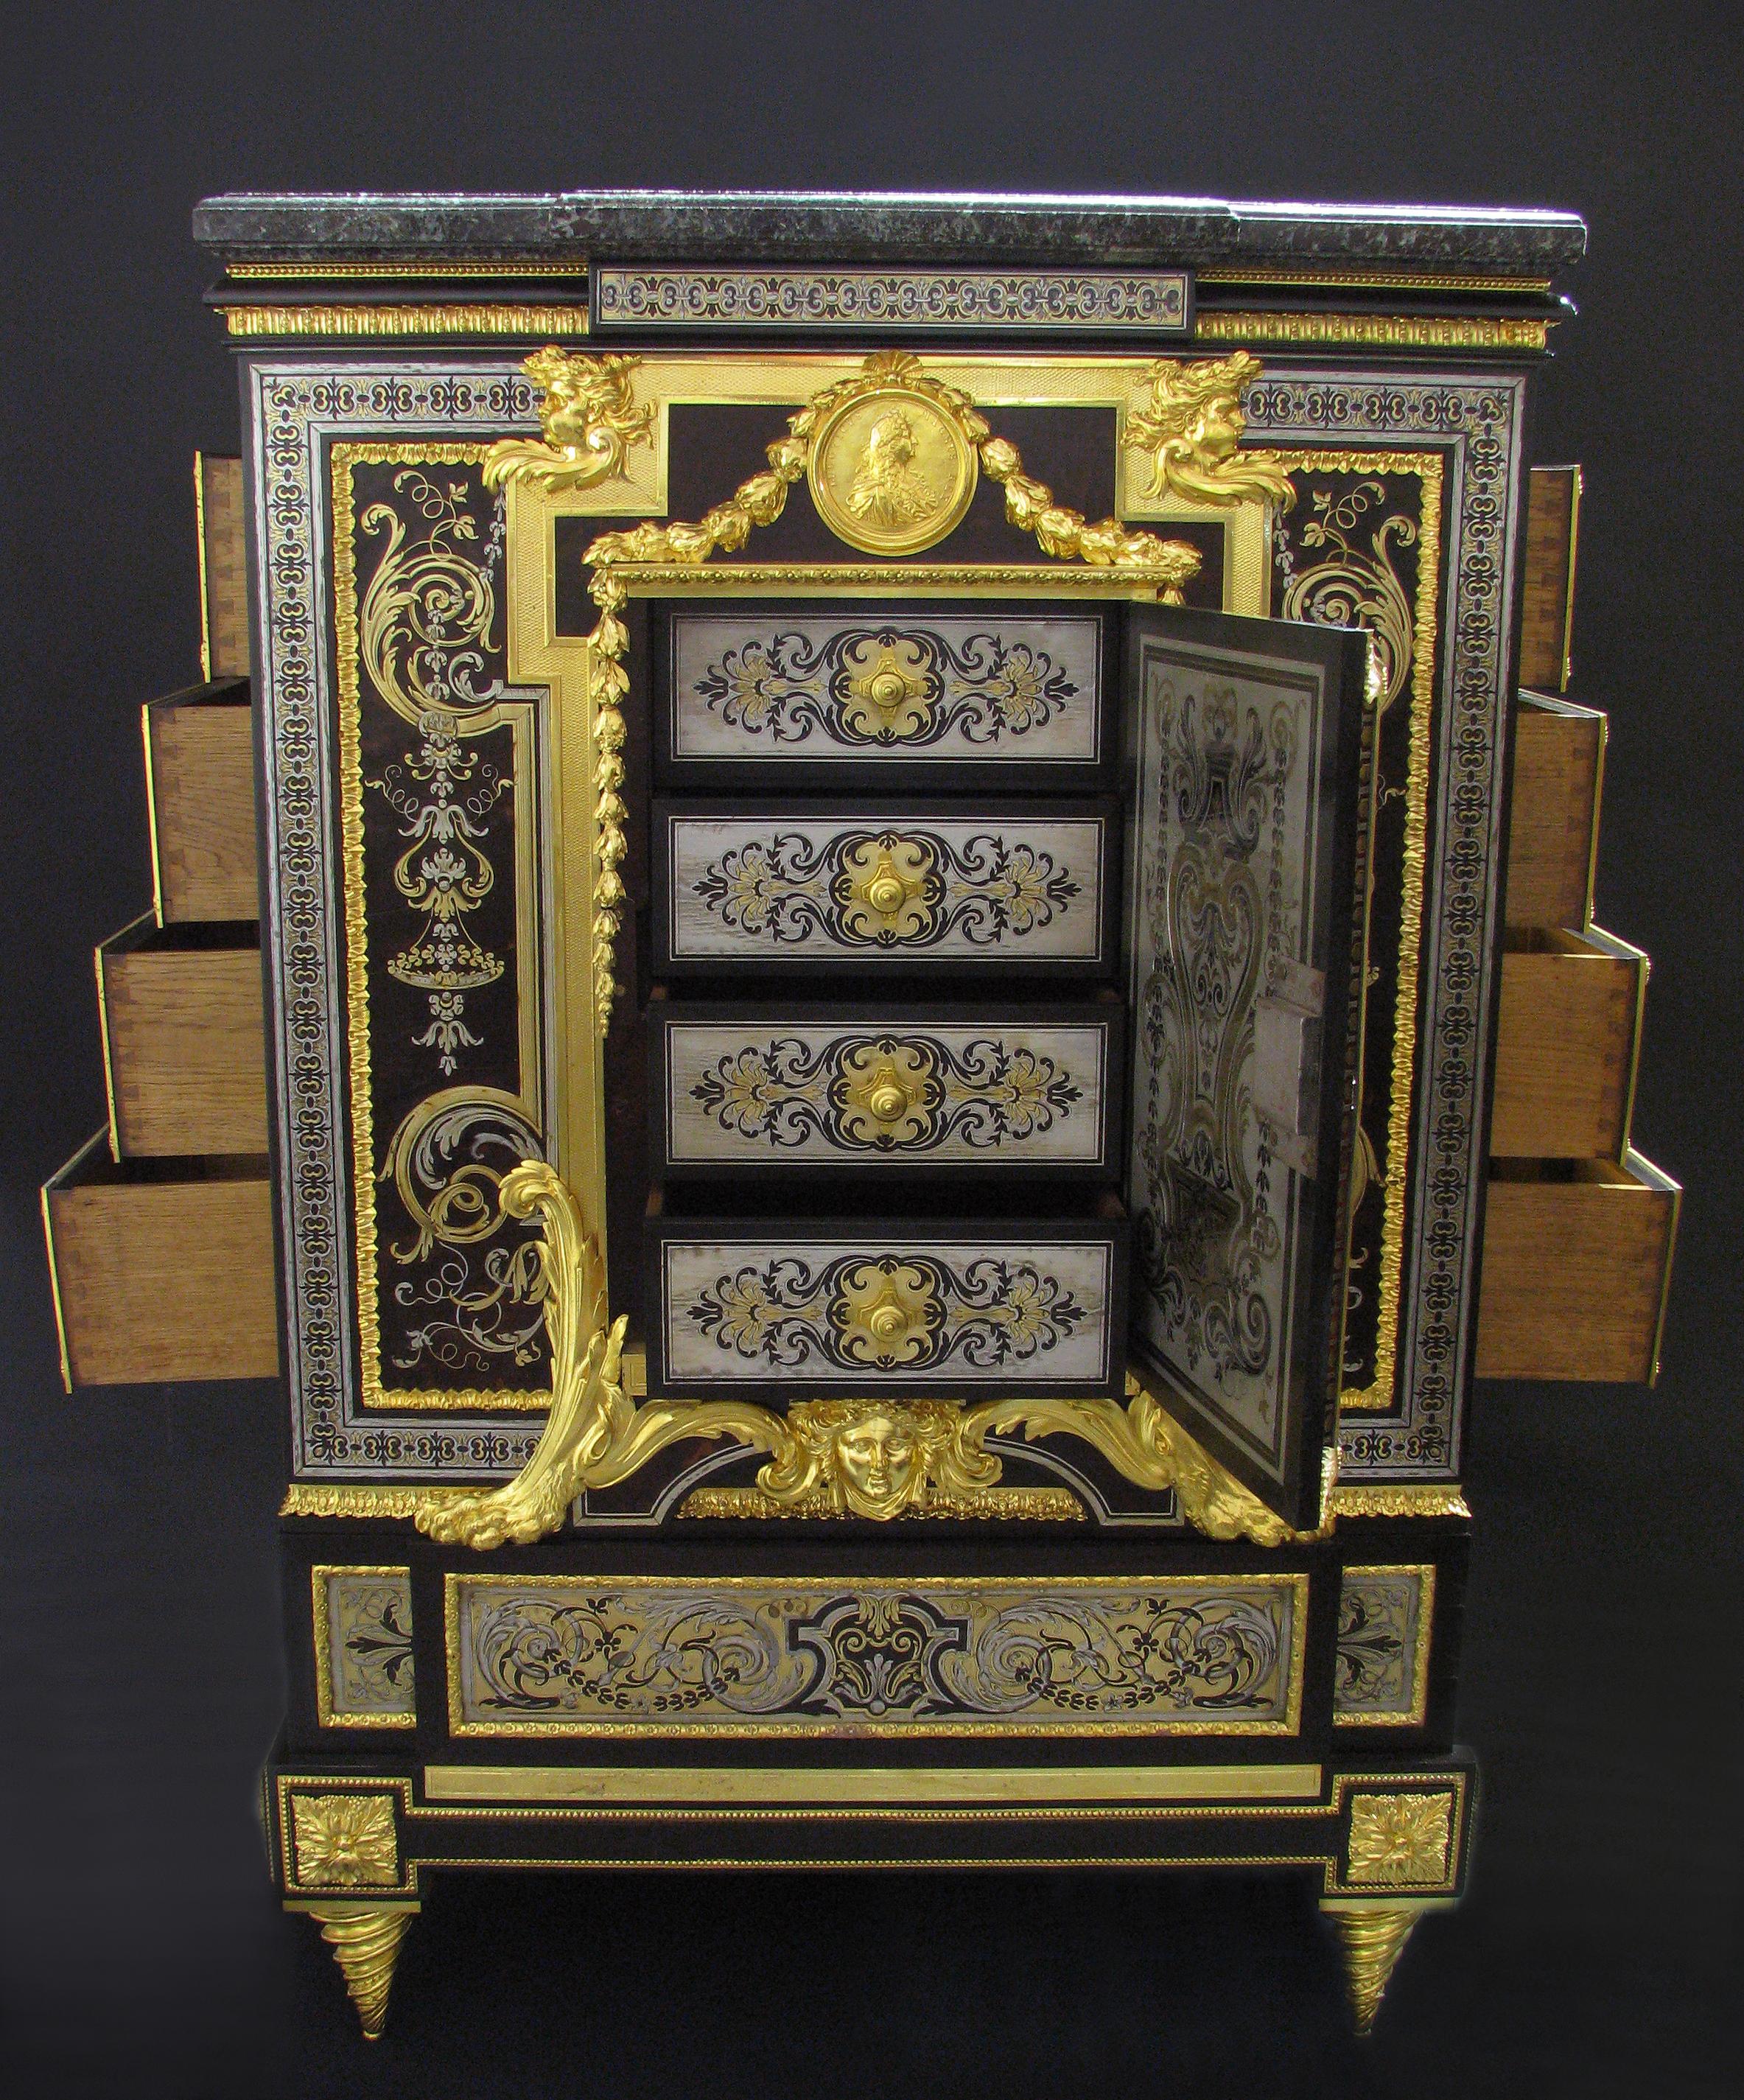 A fine napoléon III gilt bronze mounted engraved brass, pewter and tortoiseshell inlaid boulle style marquetry side cabinet

Attributed to Charles-Guilluame Winckelsen - After the model by André-Charles Boulle

Engraved brass, pewter, red and